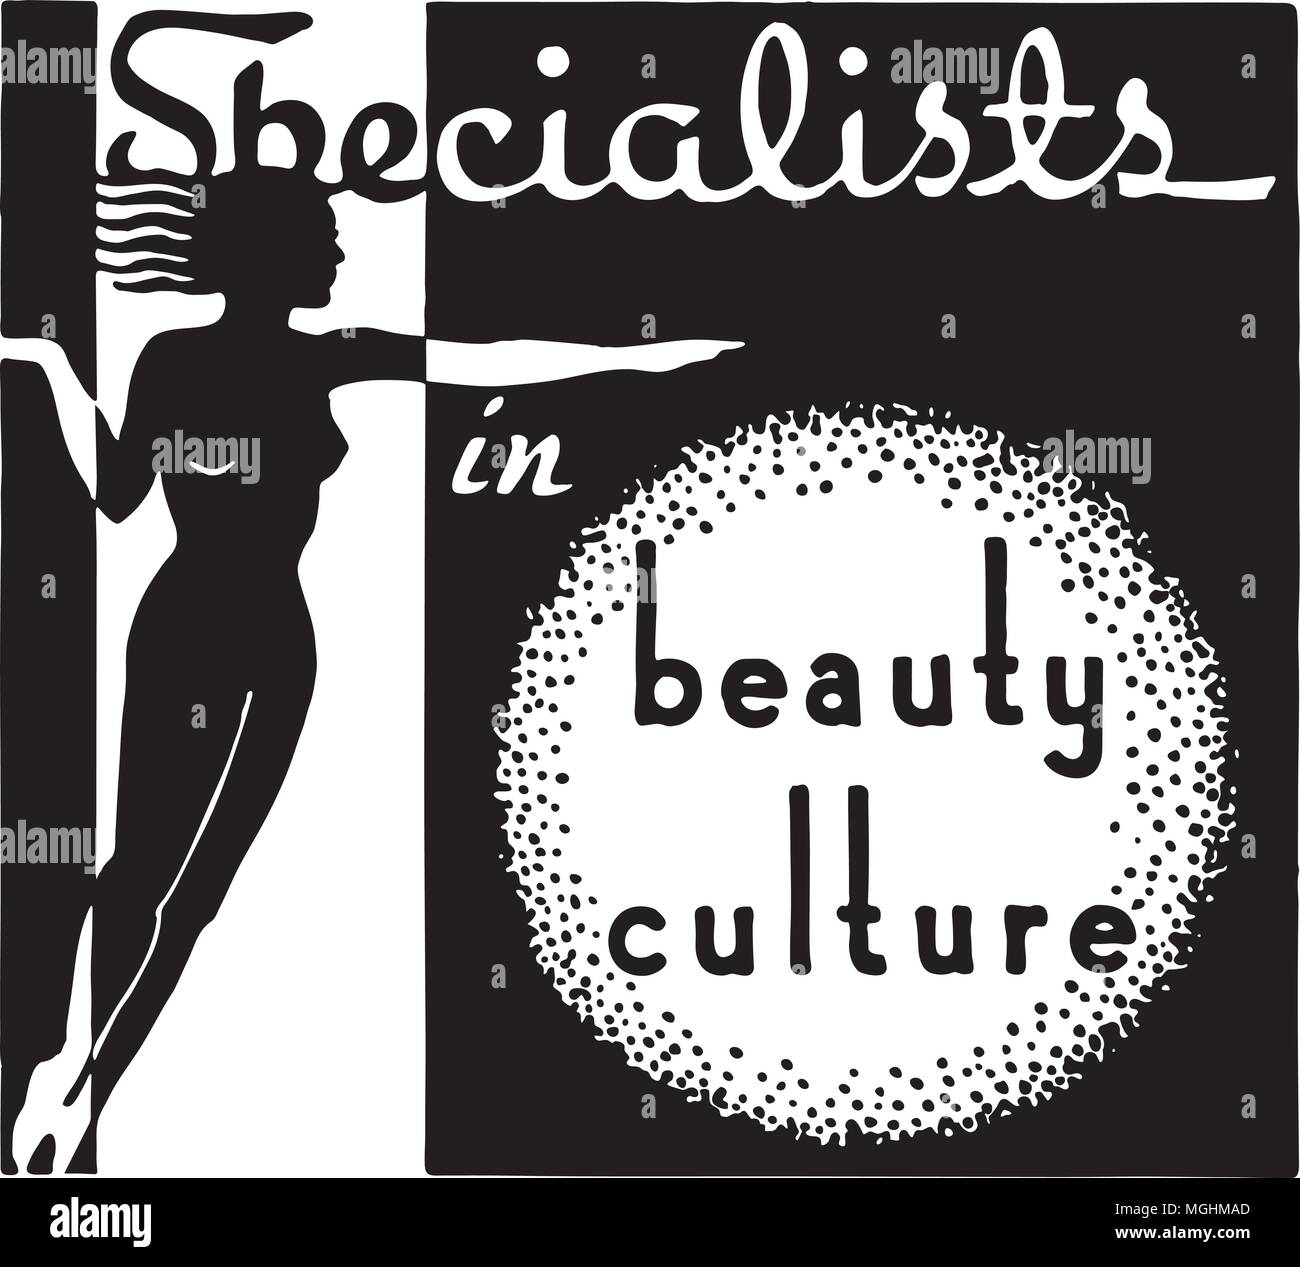 Specialists In Beauty Culture - Retro Ad Art Banner Stock Vector